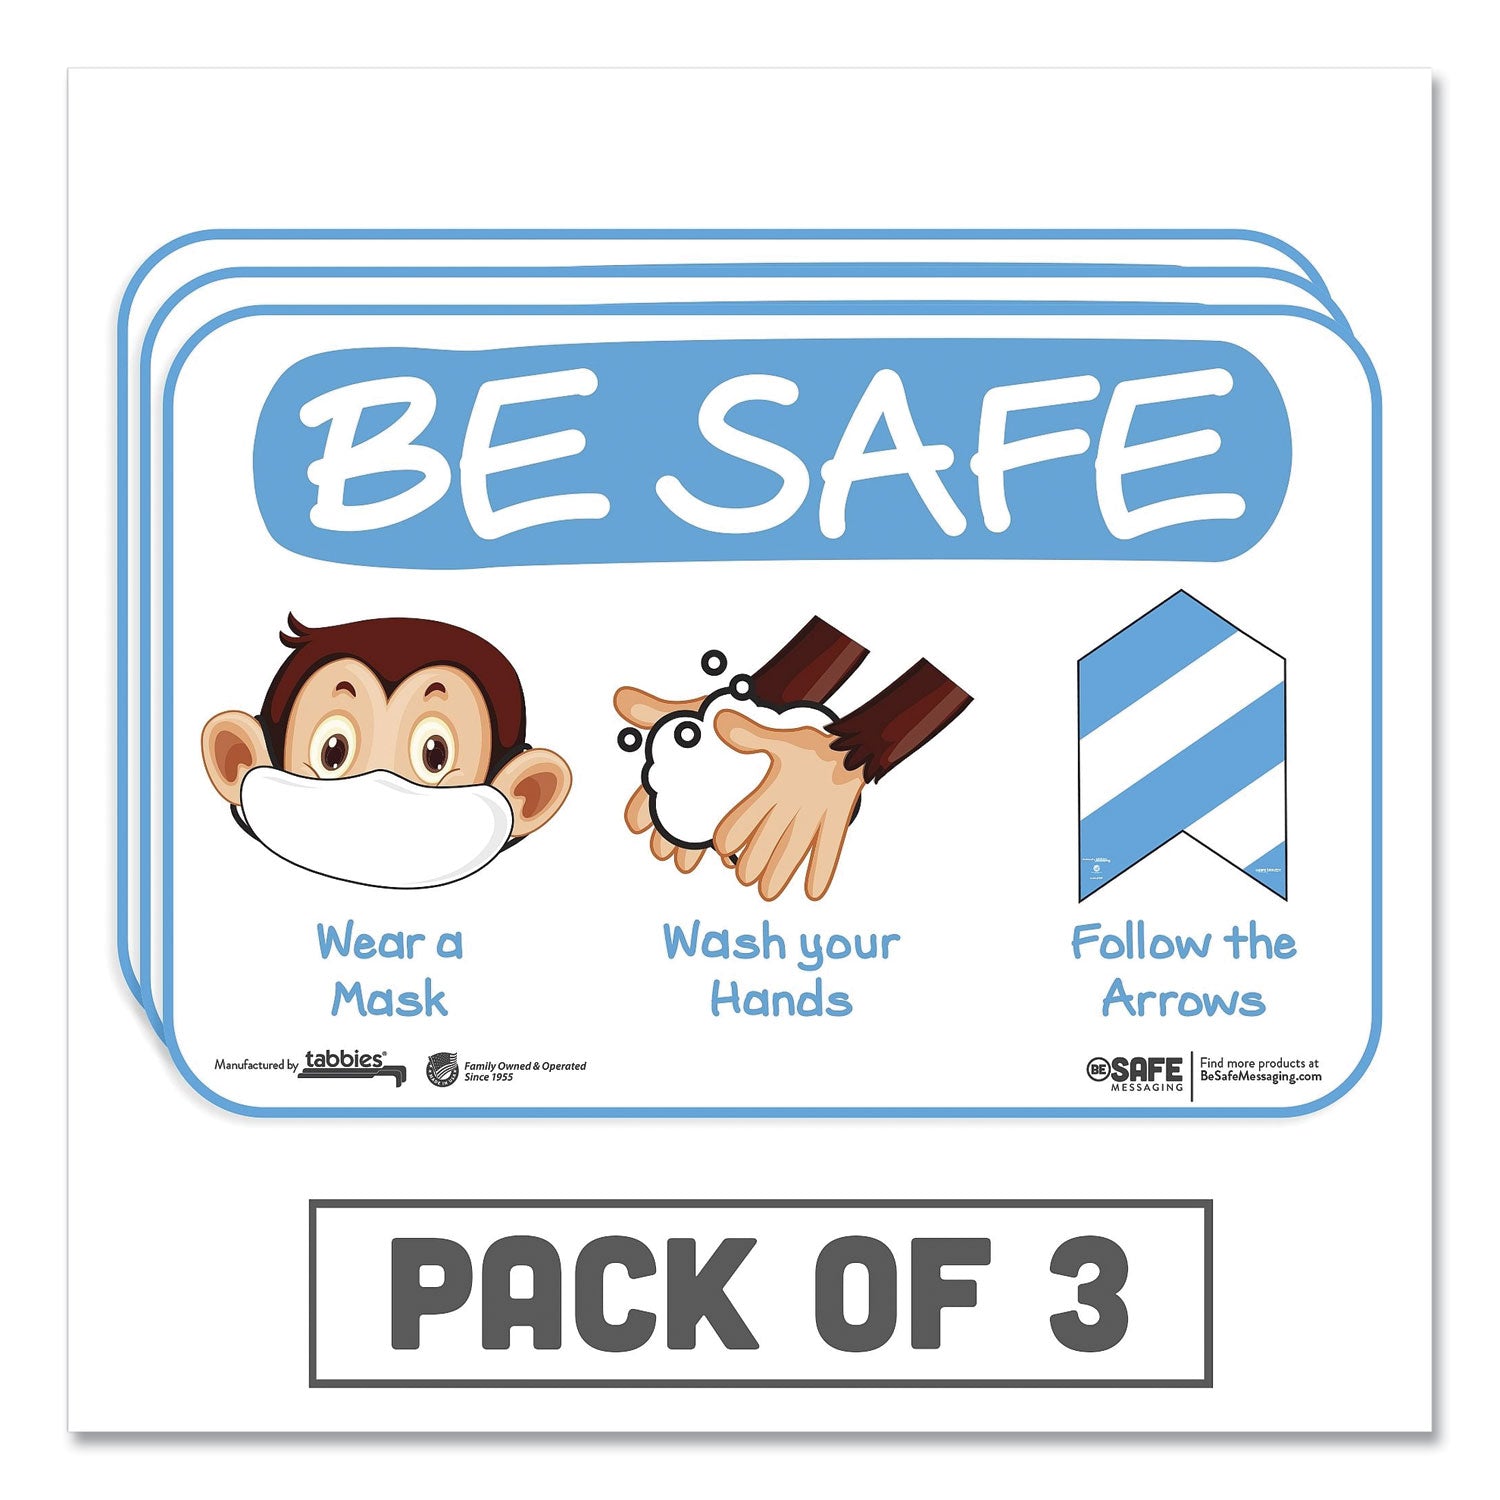 besafe-messaging-education-wall-signs-9-x-6-be-safe-wear-a-mask-wash-your-hands-follow-the-arrows-monkey-3-pack_tab29506 - 1